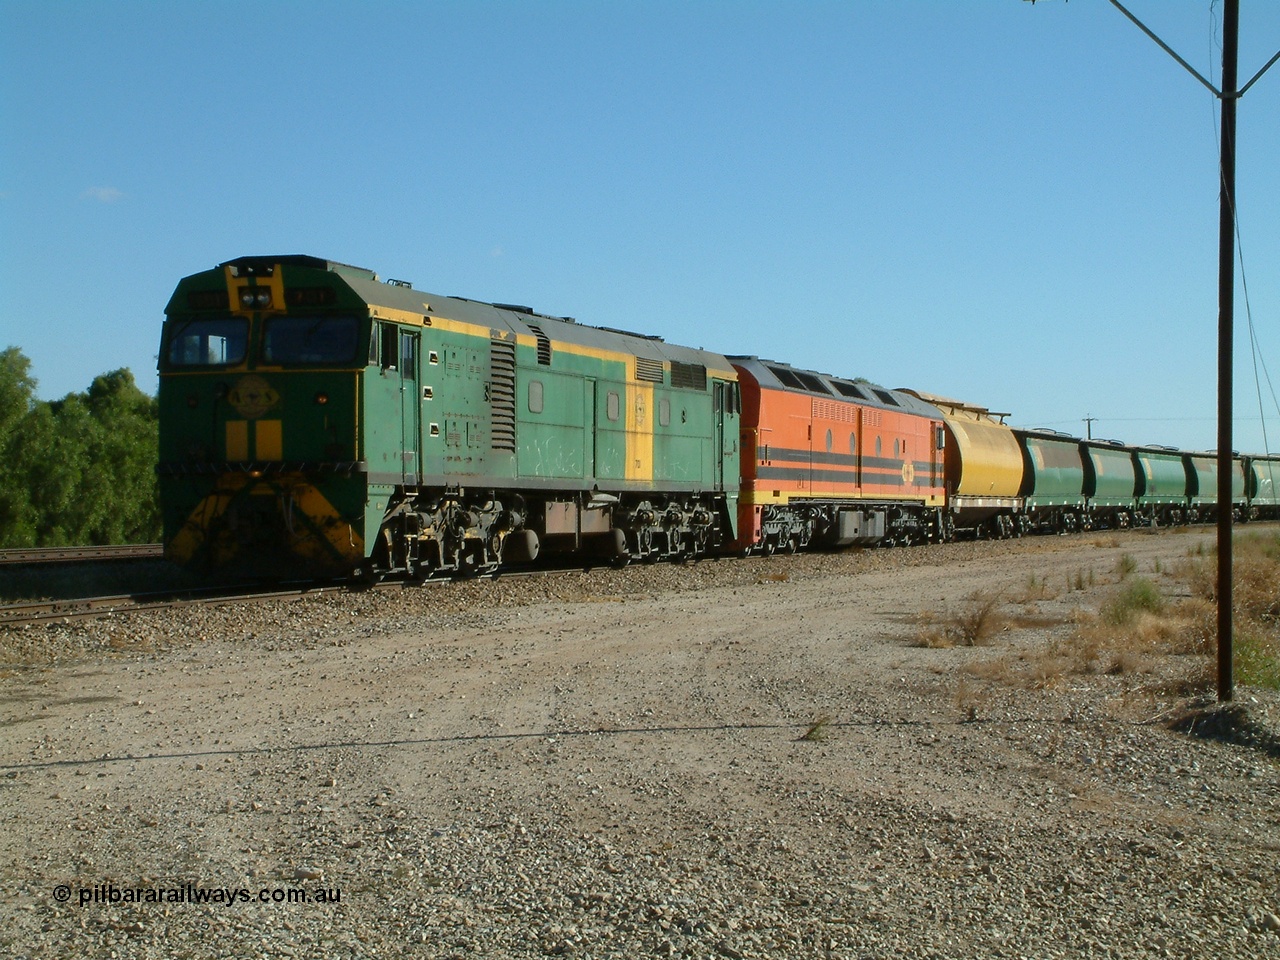 030403 154420
Gladstone, former South Australian Railways AE Goodwin built DL500G ALCo designated the 700 class, class leader 701 serial G6042-2 leads a grain train with an ALF class and first waggon a former WAGR WW now WWS grain waggon, train being loaded on the 3rd April 2003.
Keywords: 700-class;701;AE-Goodwin;ALCo;DL500G;G6042-2;